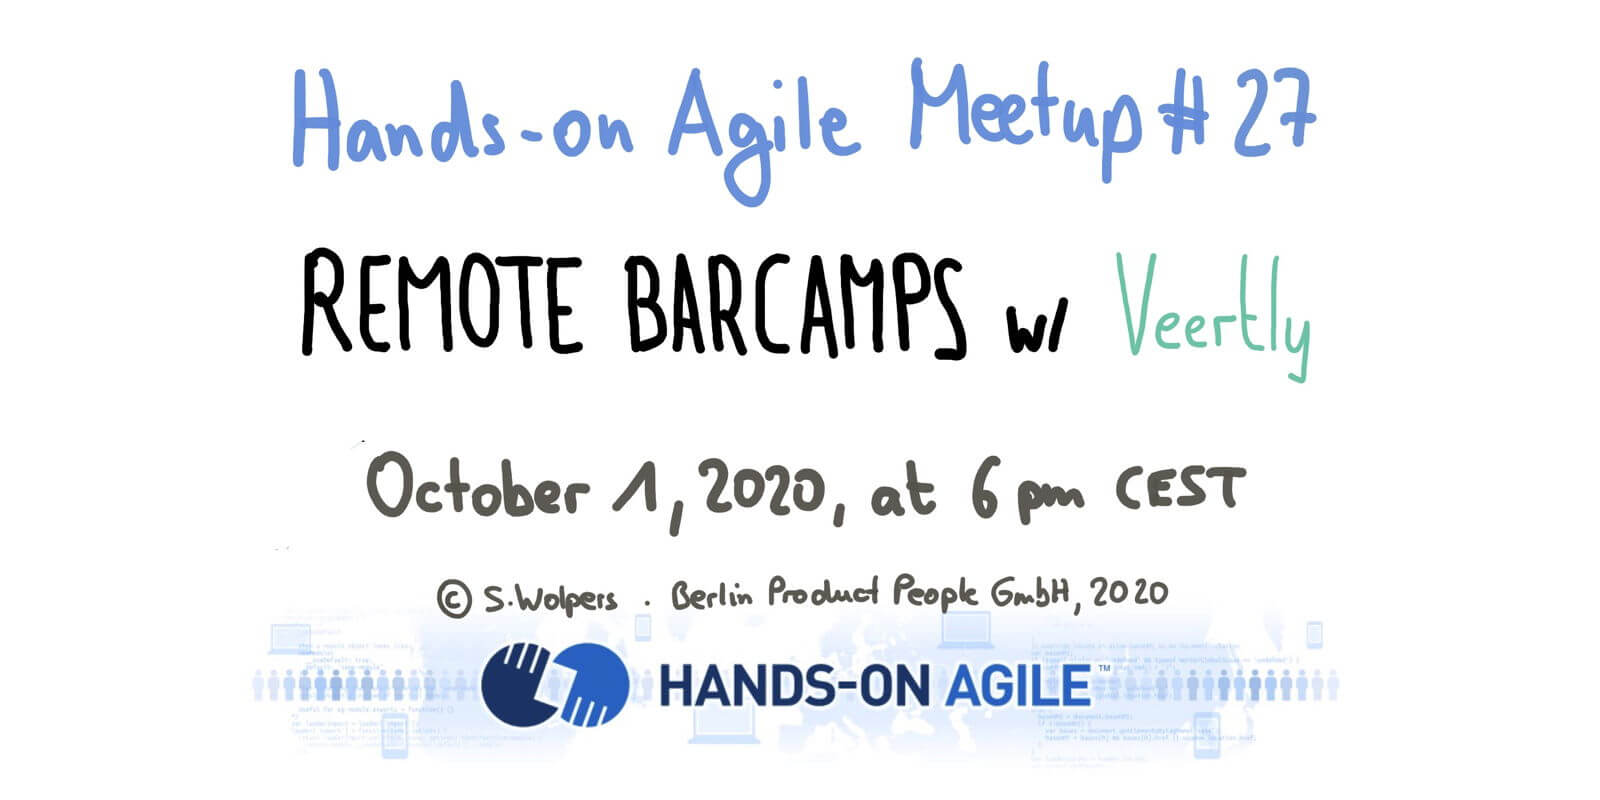 🖥 Hands-on Agile #27: Virtual Open Space Events w/ Veertly — Berlin Product People GmbH